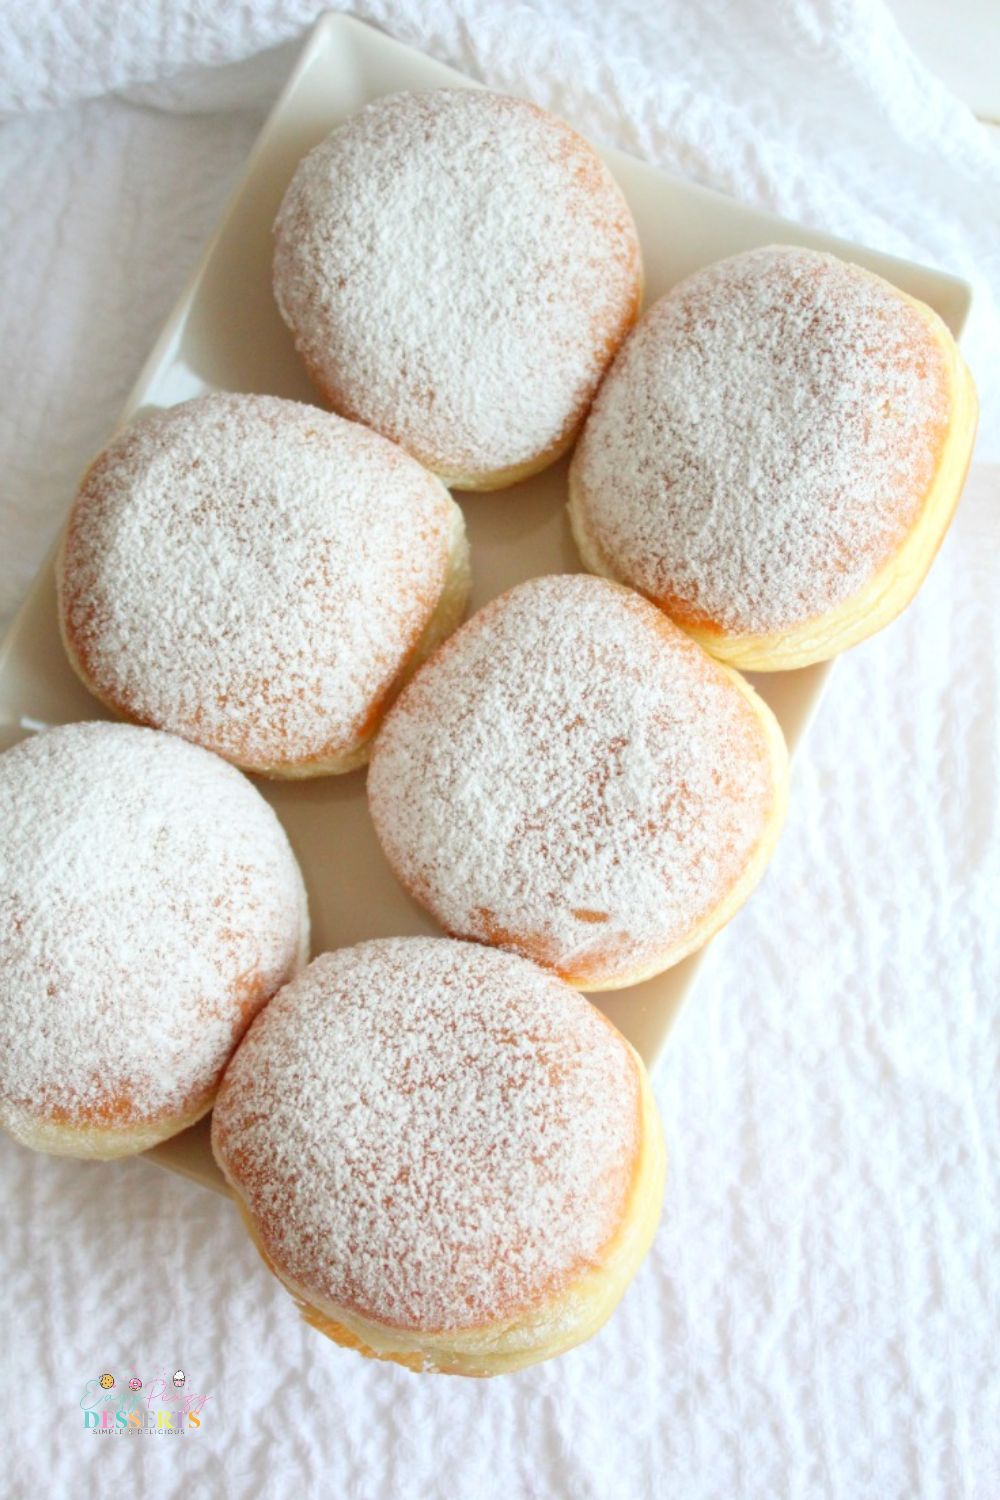 Image of six jam filled donuts on a plate